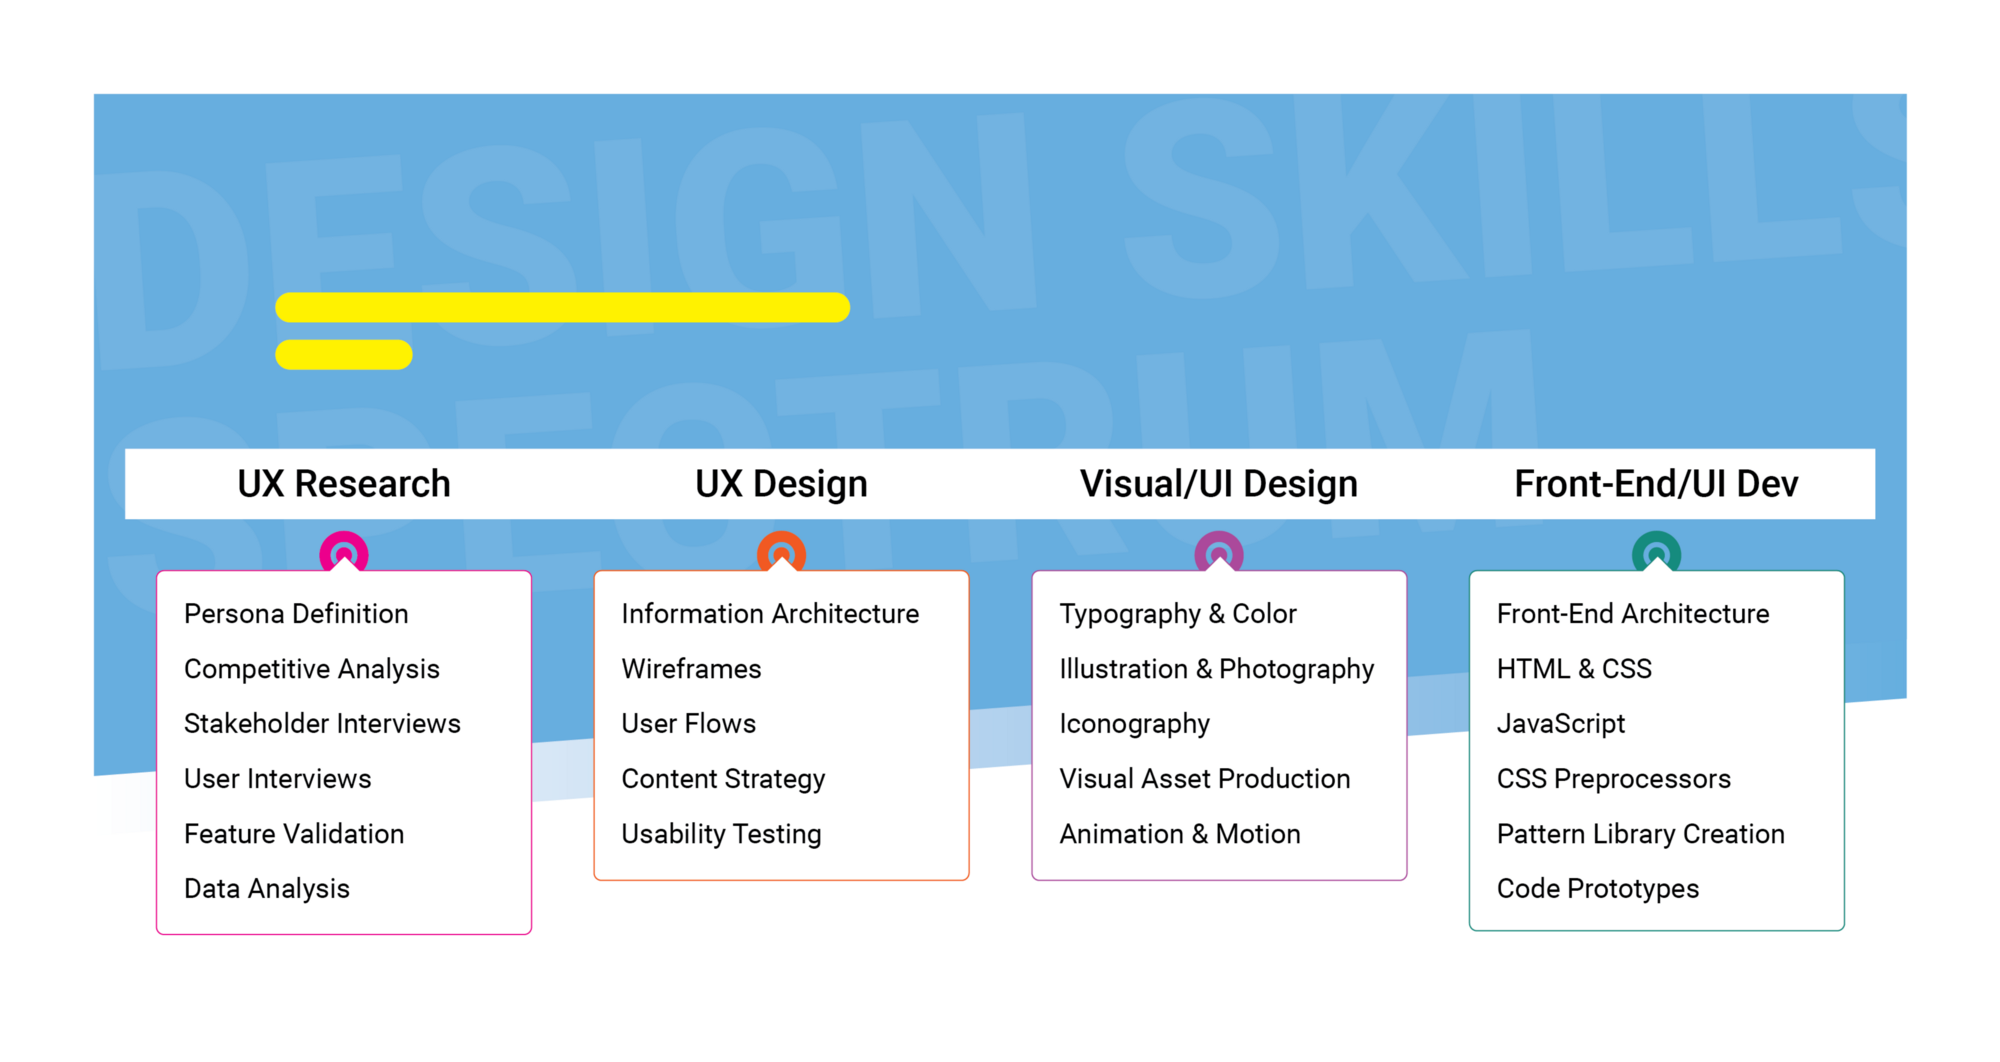 A designer with depth in UX Research and breadth in UX Design